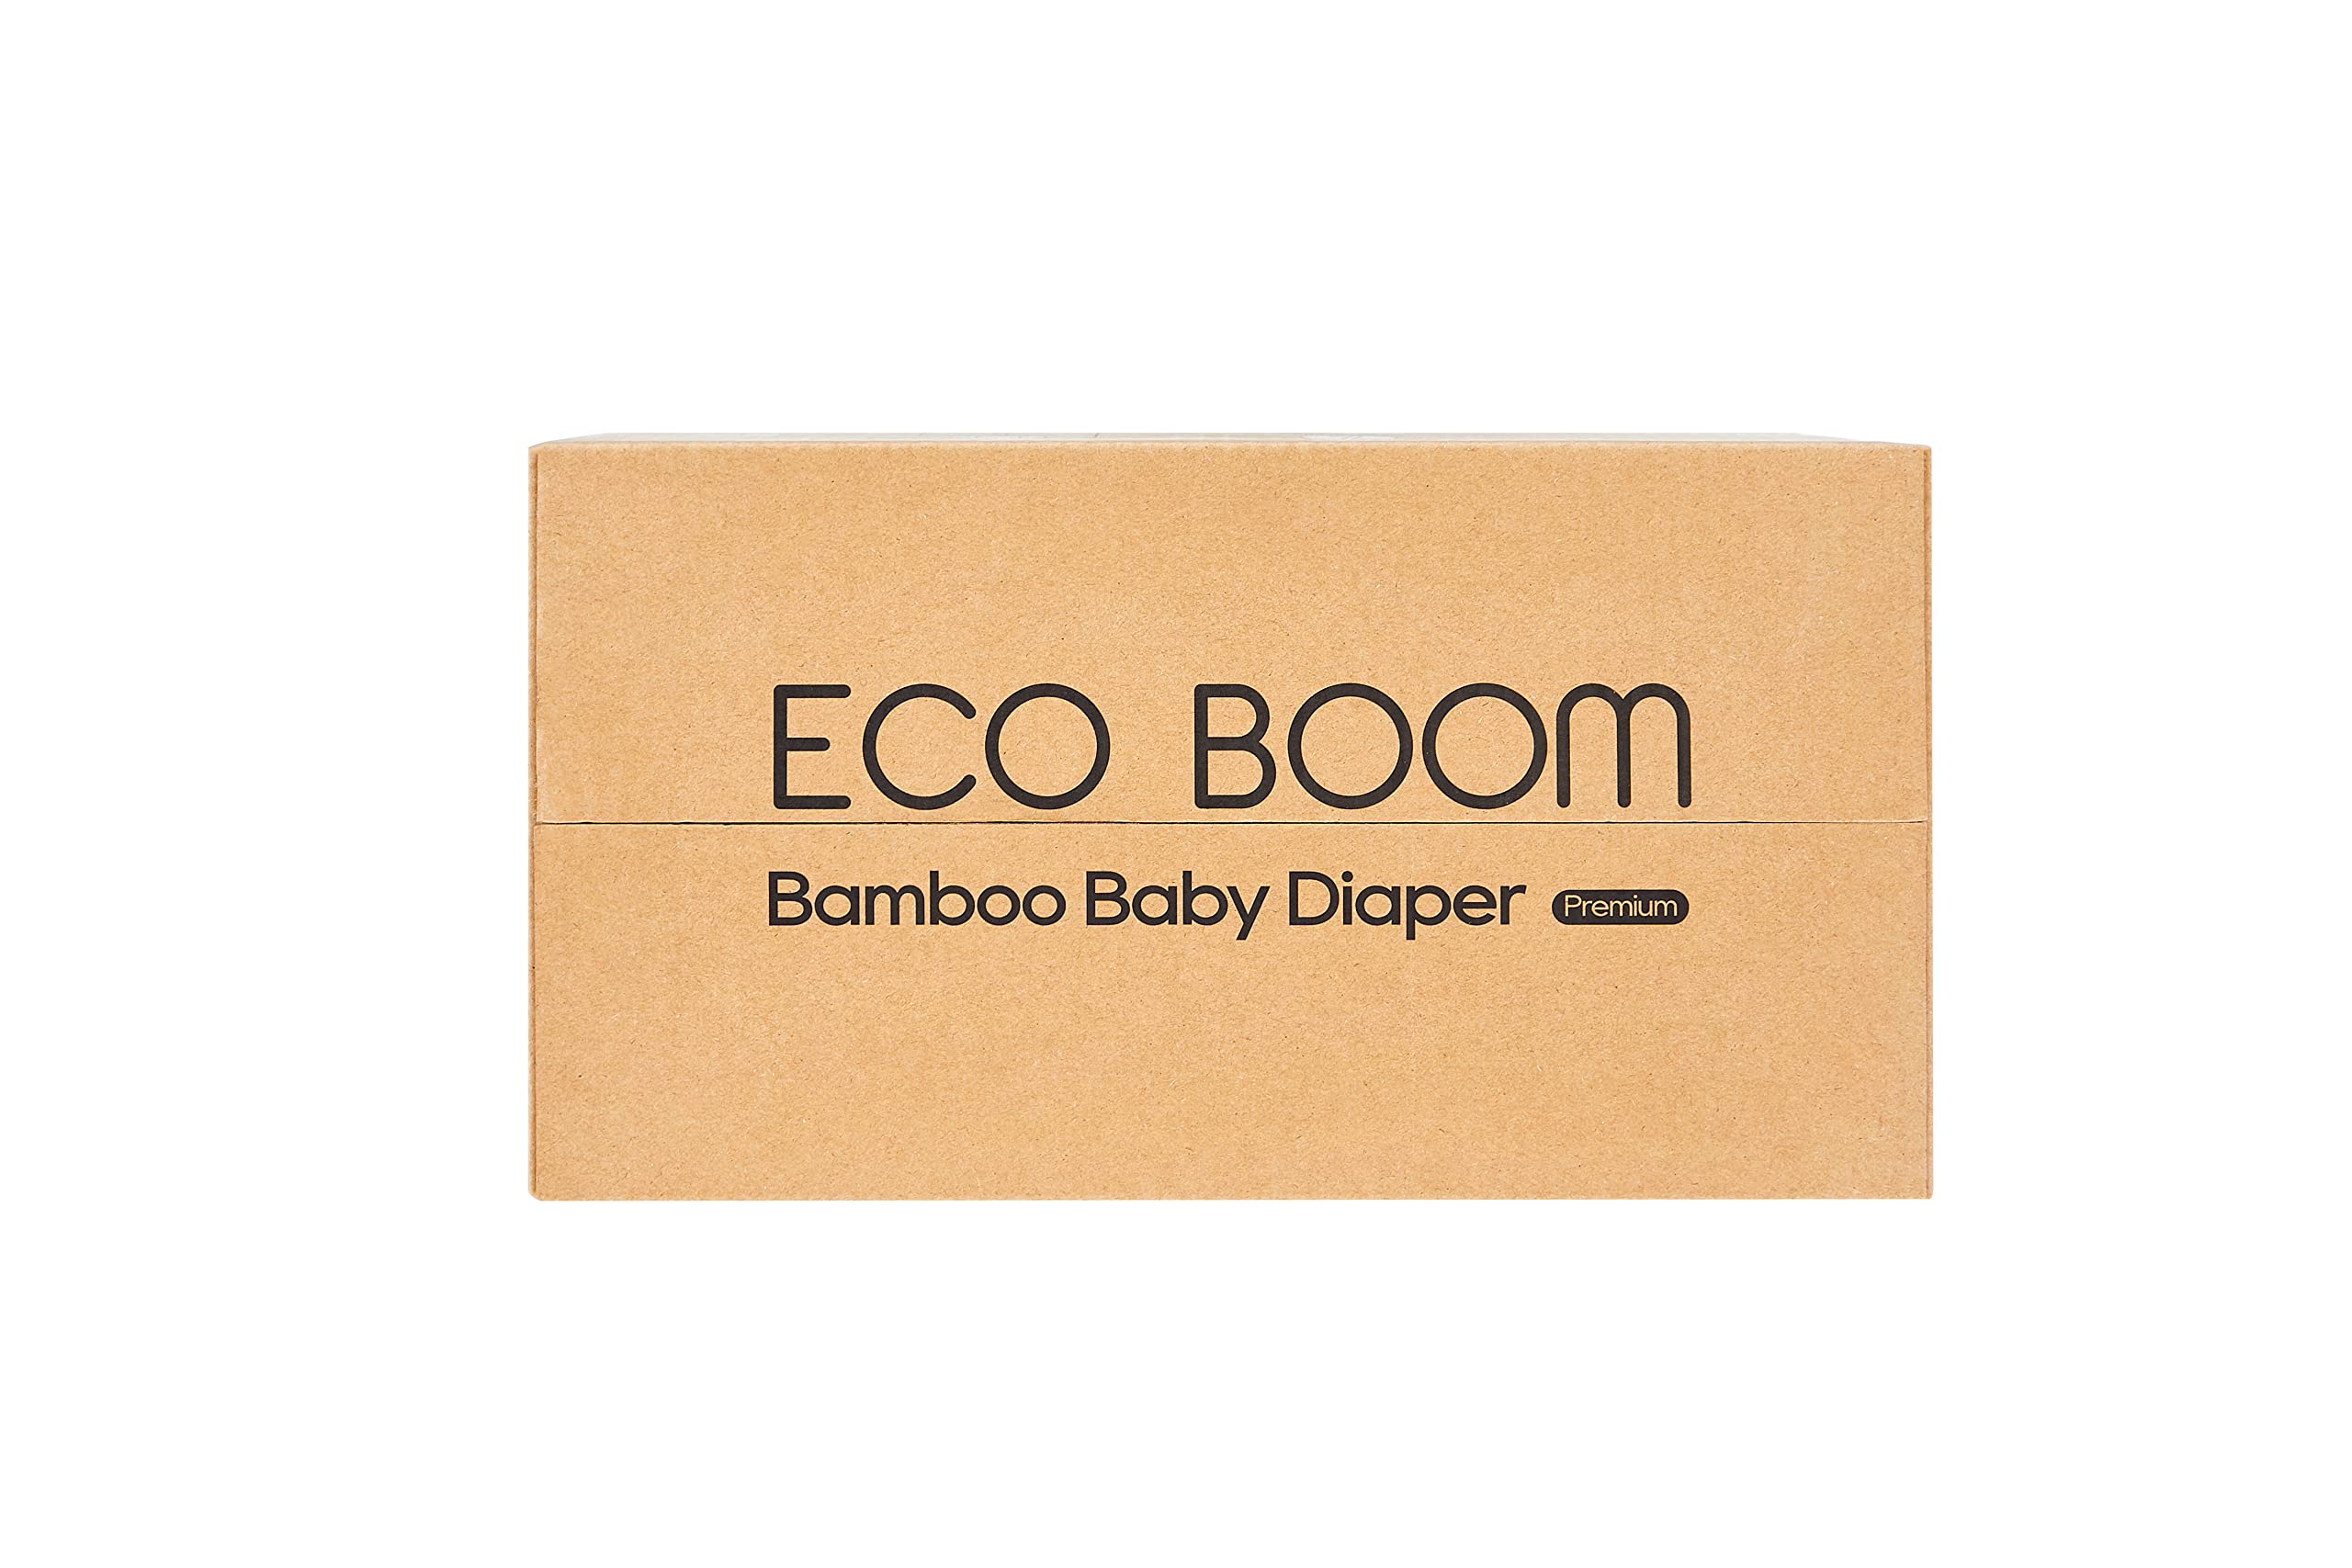 ECO BOOM Diapers, Baby Bamboo Viscose Diapers, Eco-Friendly Natural Soft Disposable Nappies for Infant, Size 2 Suitable for 6 to 16lb (Small - 102 Count)